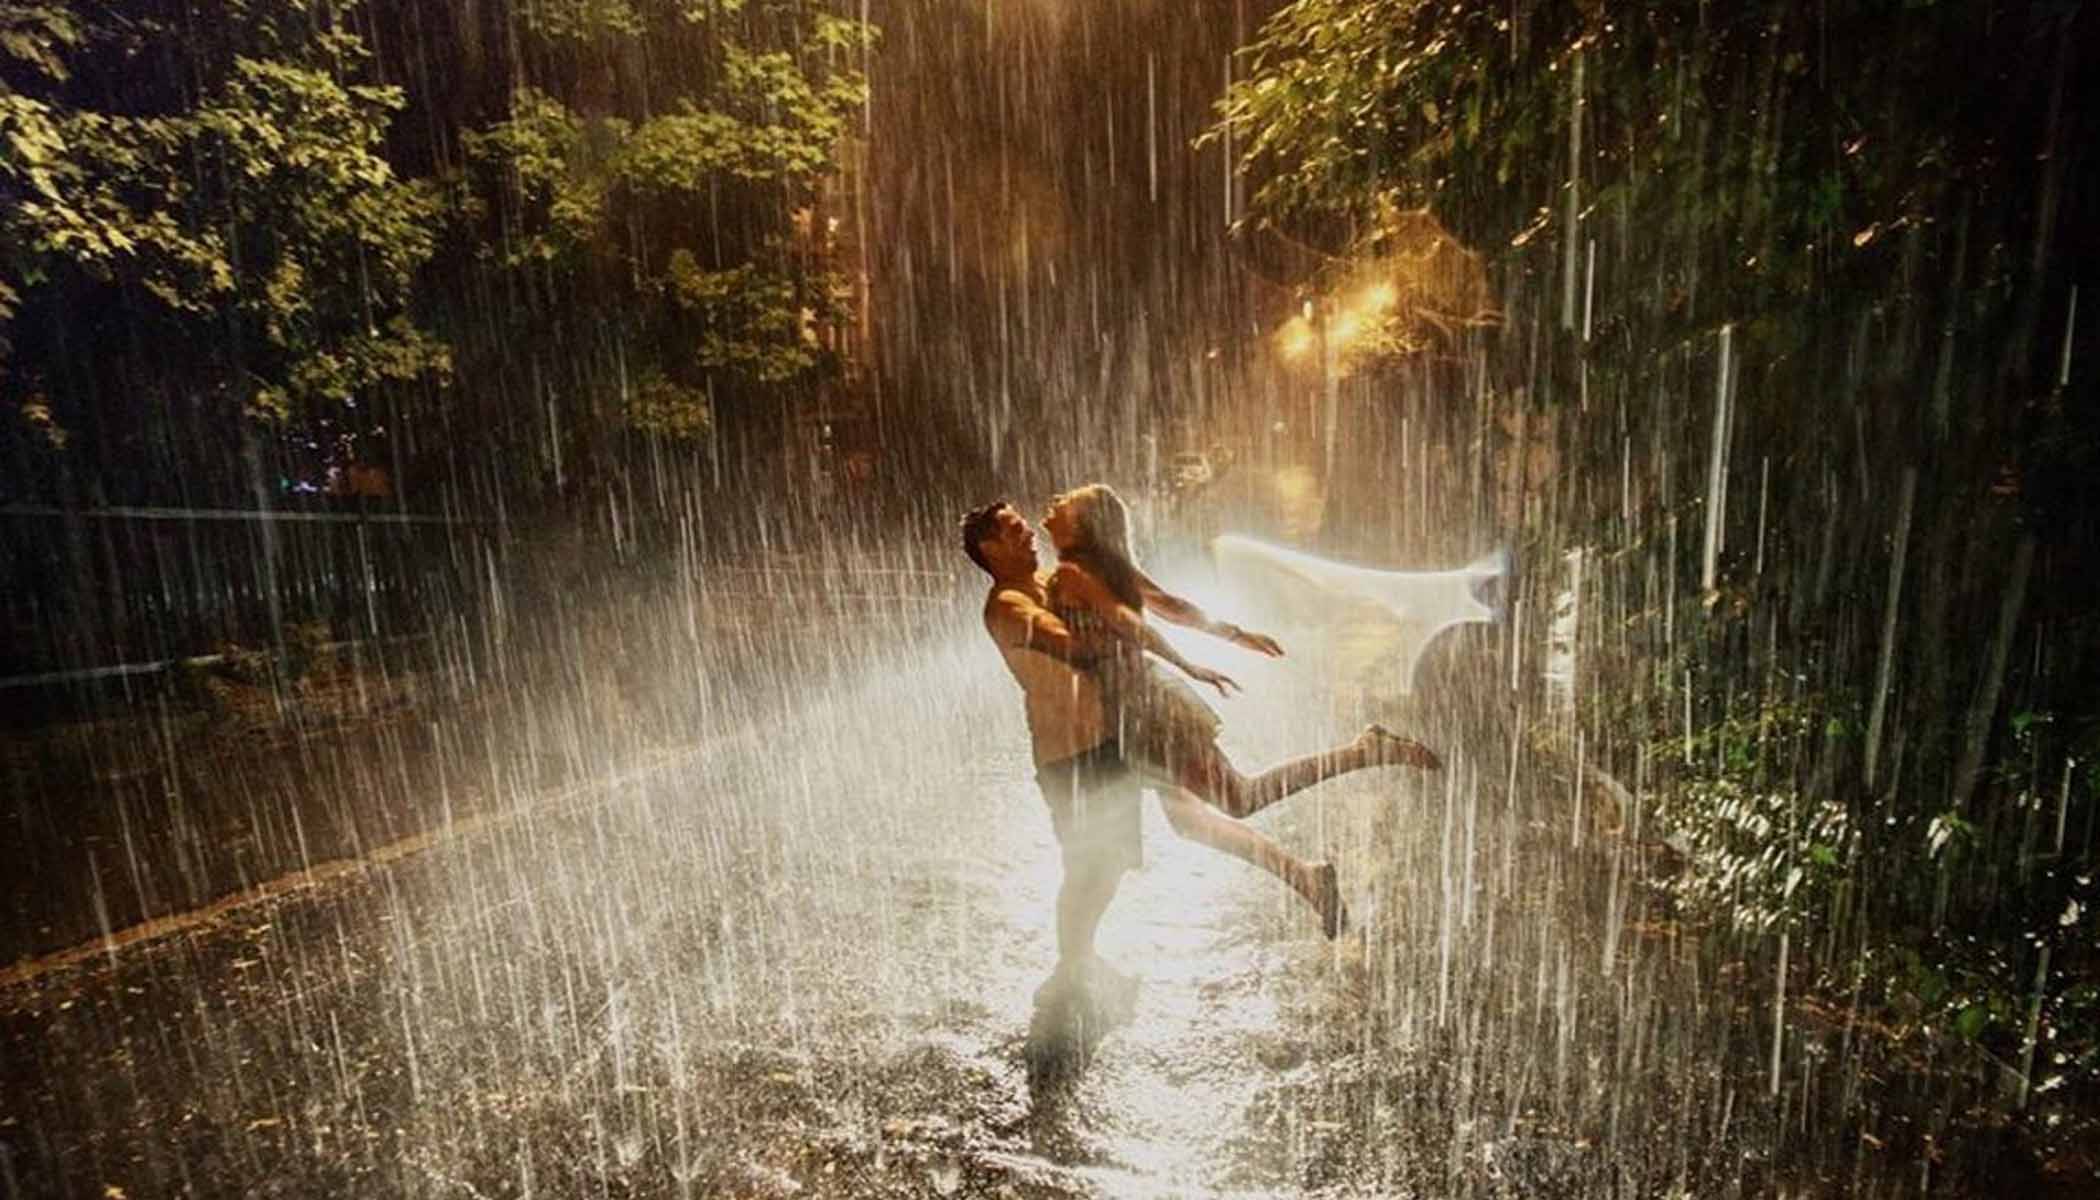 Love Rain Glass Full Hd Download Hd Wallpapers And Free Image Rainy.